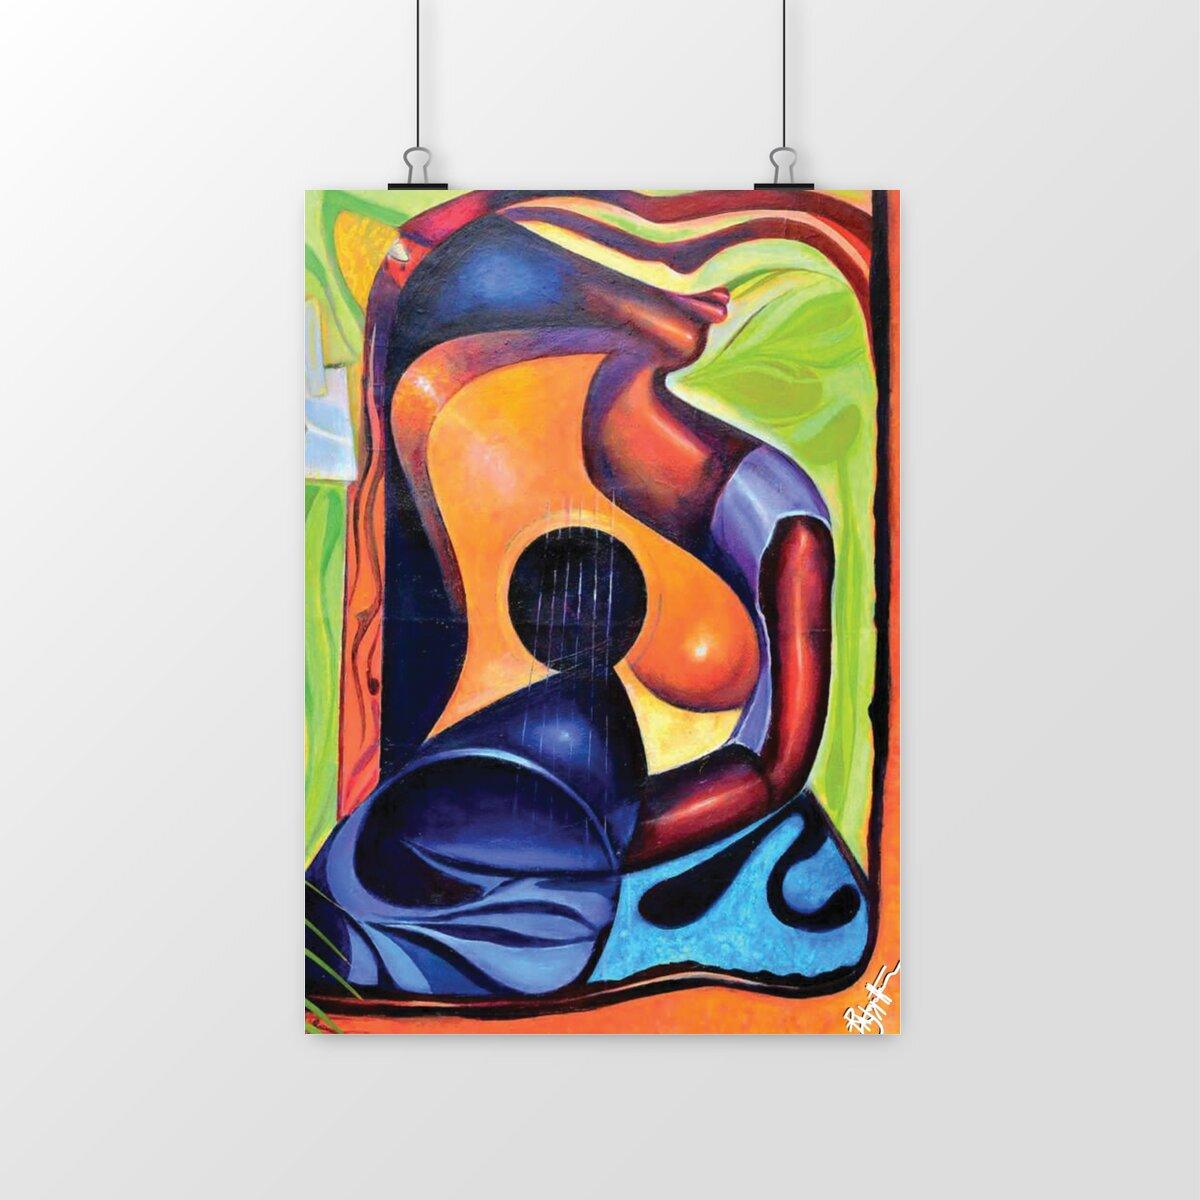 Acoustic Whisperer by Robert Joyette, museum quality print, captures the essence of sound and culture, available at Tree of Life Art.